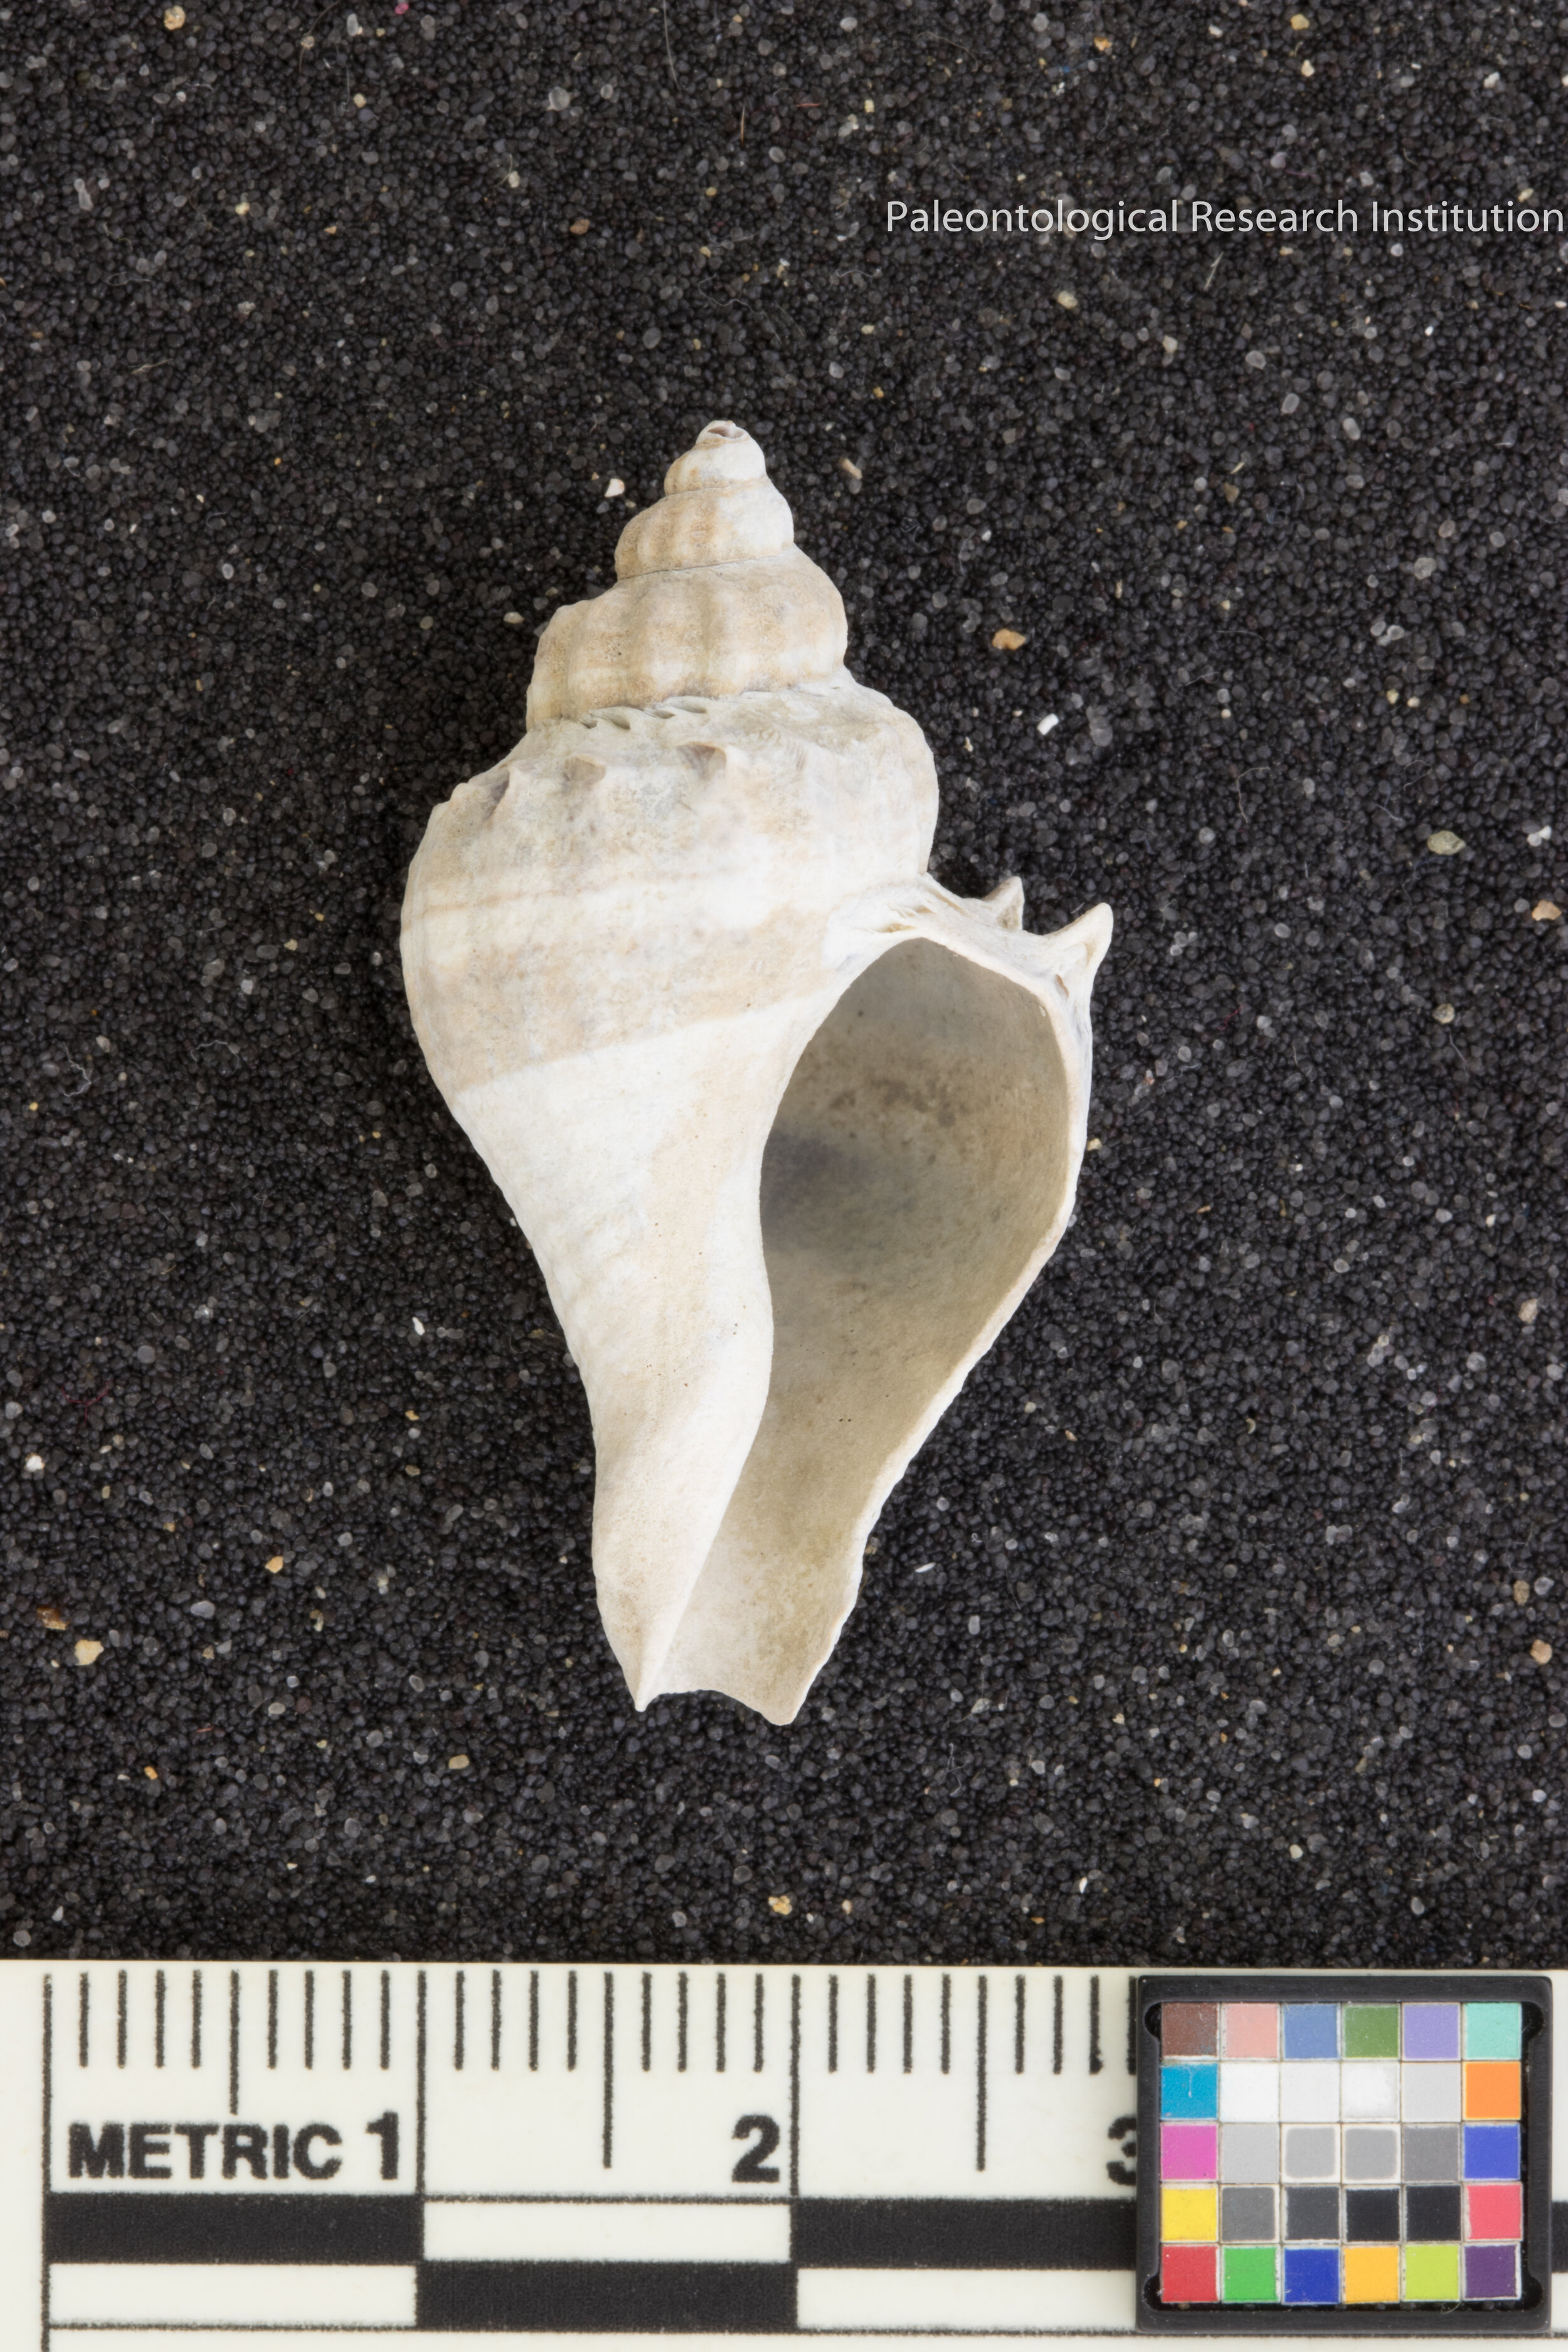 2. Crown Conch